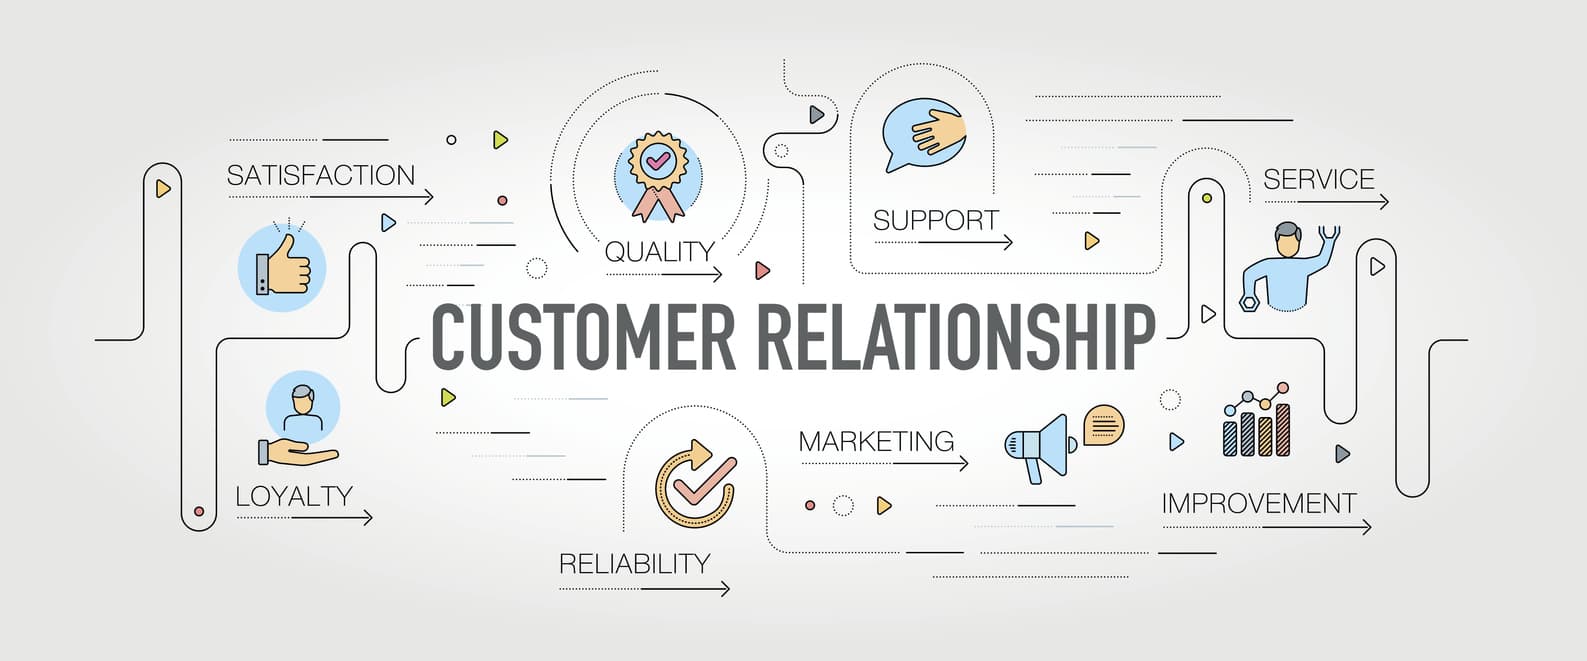 A flow chart showing the many ways that a sales team can improve customer relationships.